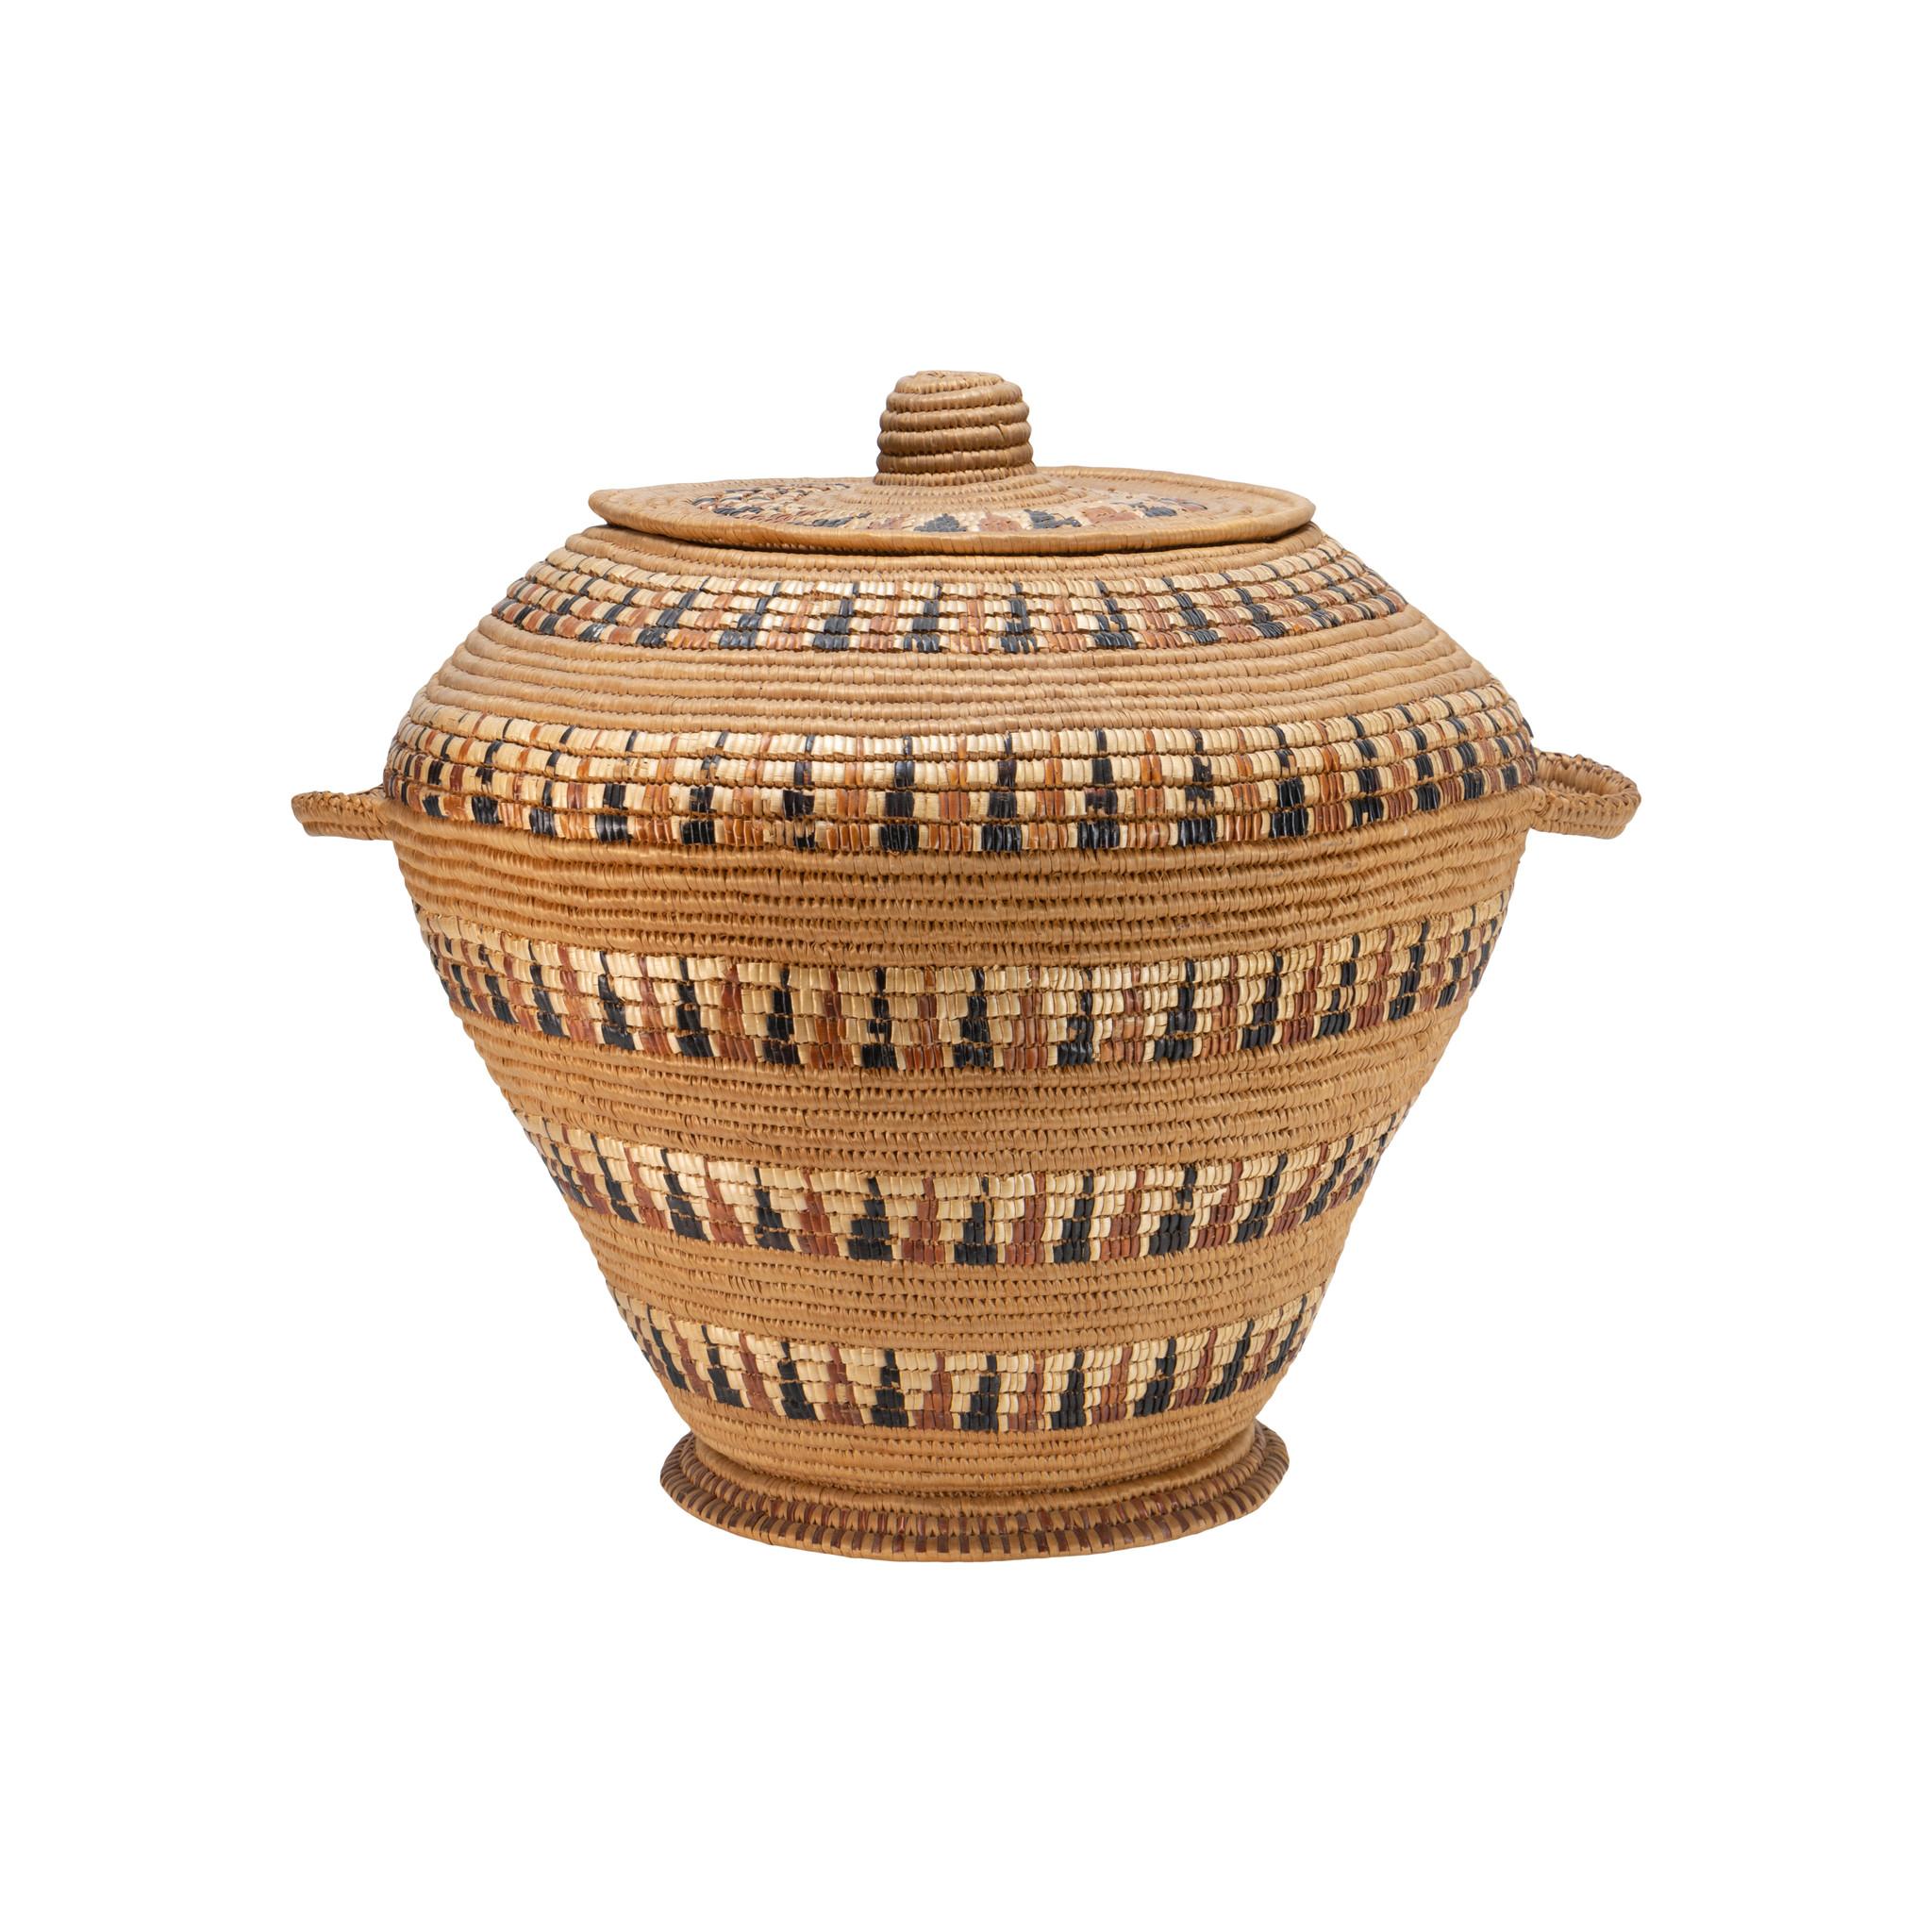 Lillooet lidded storage basket with polychrome imbricated design. Pedestal style. Traded for food in Washington, 5 miles from the Canadian border. Came to us from the granddaughter.

Period: circa 1900

Origin: Lillooet, WA

Size: 16